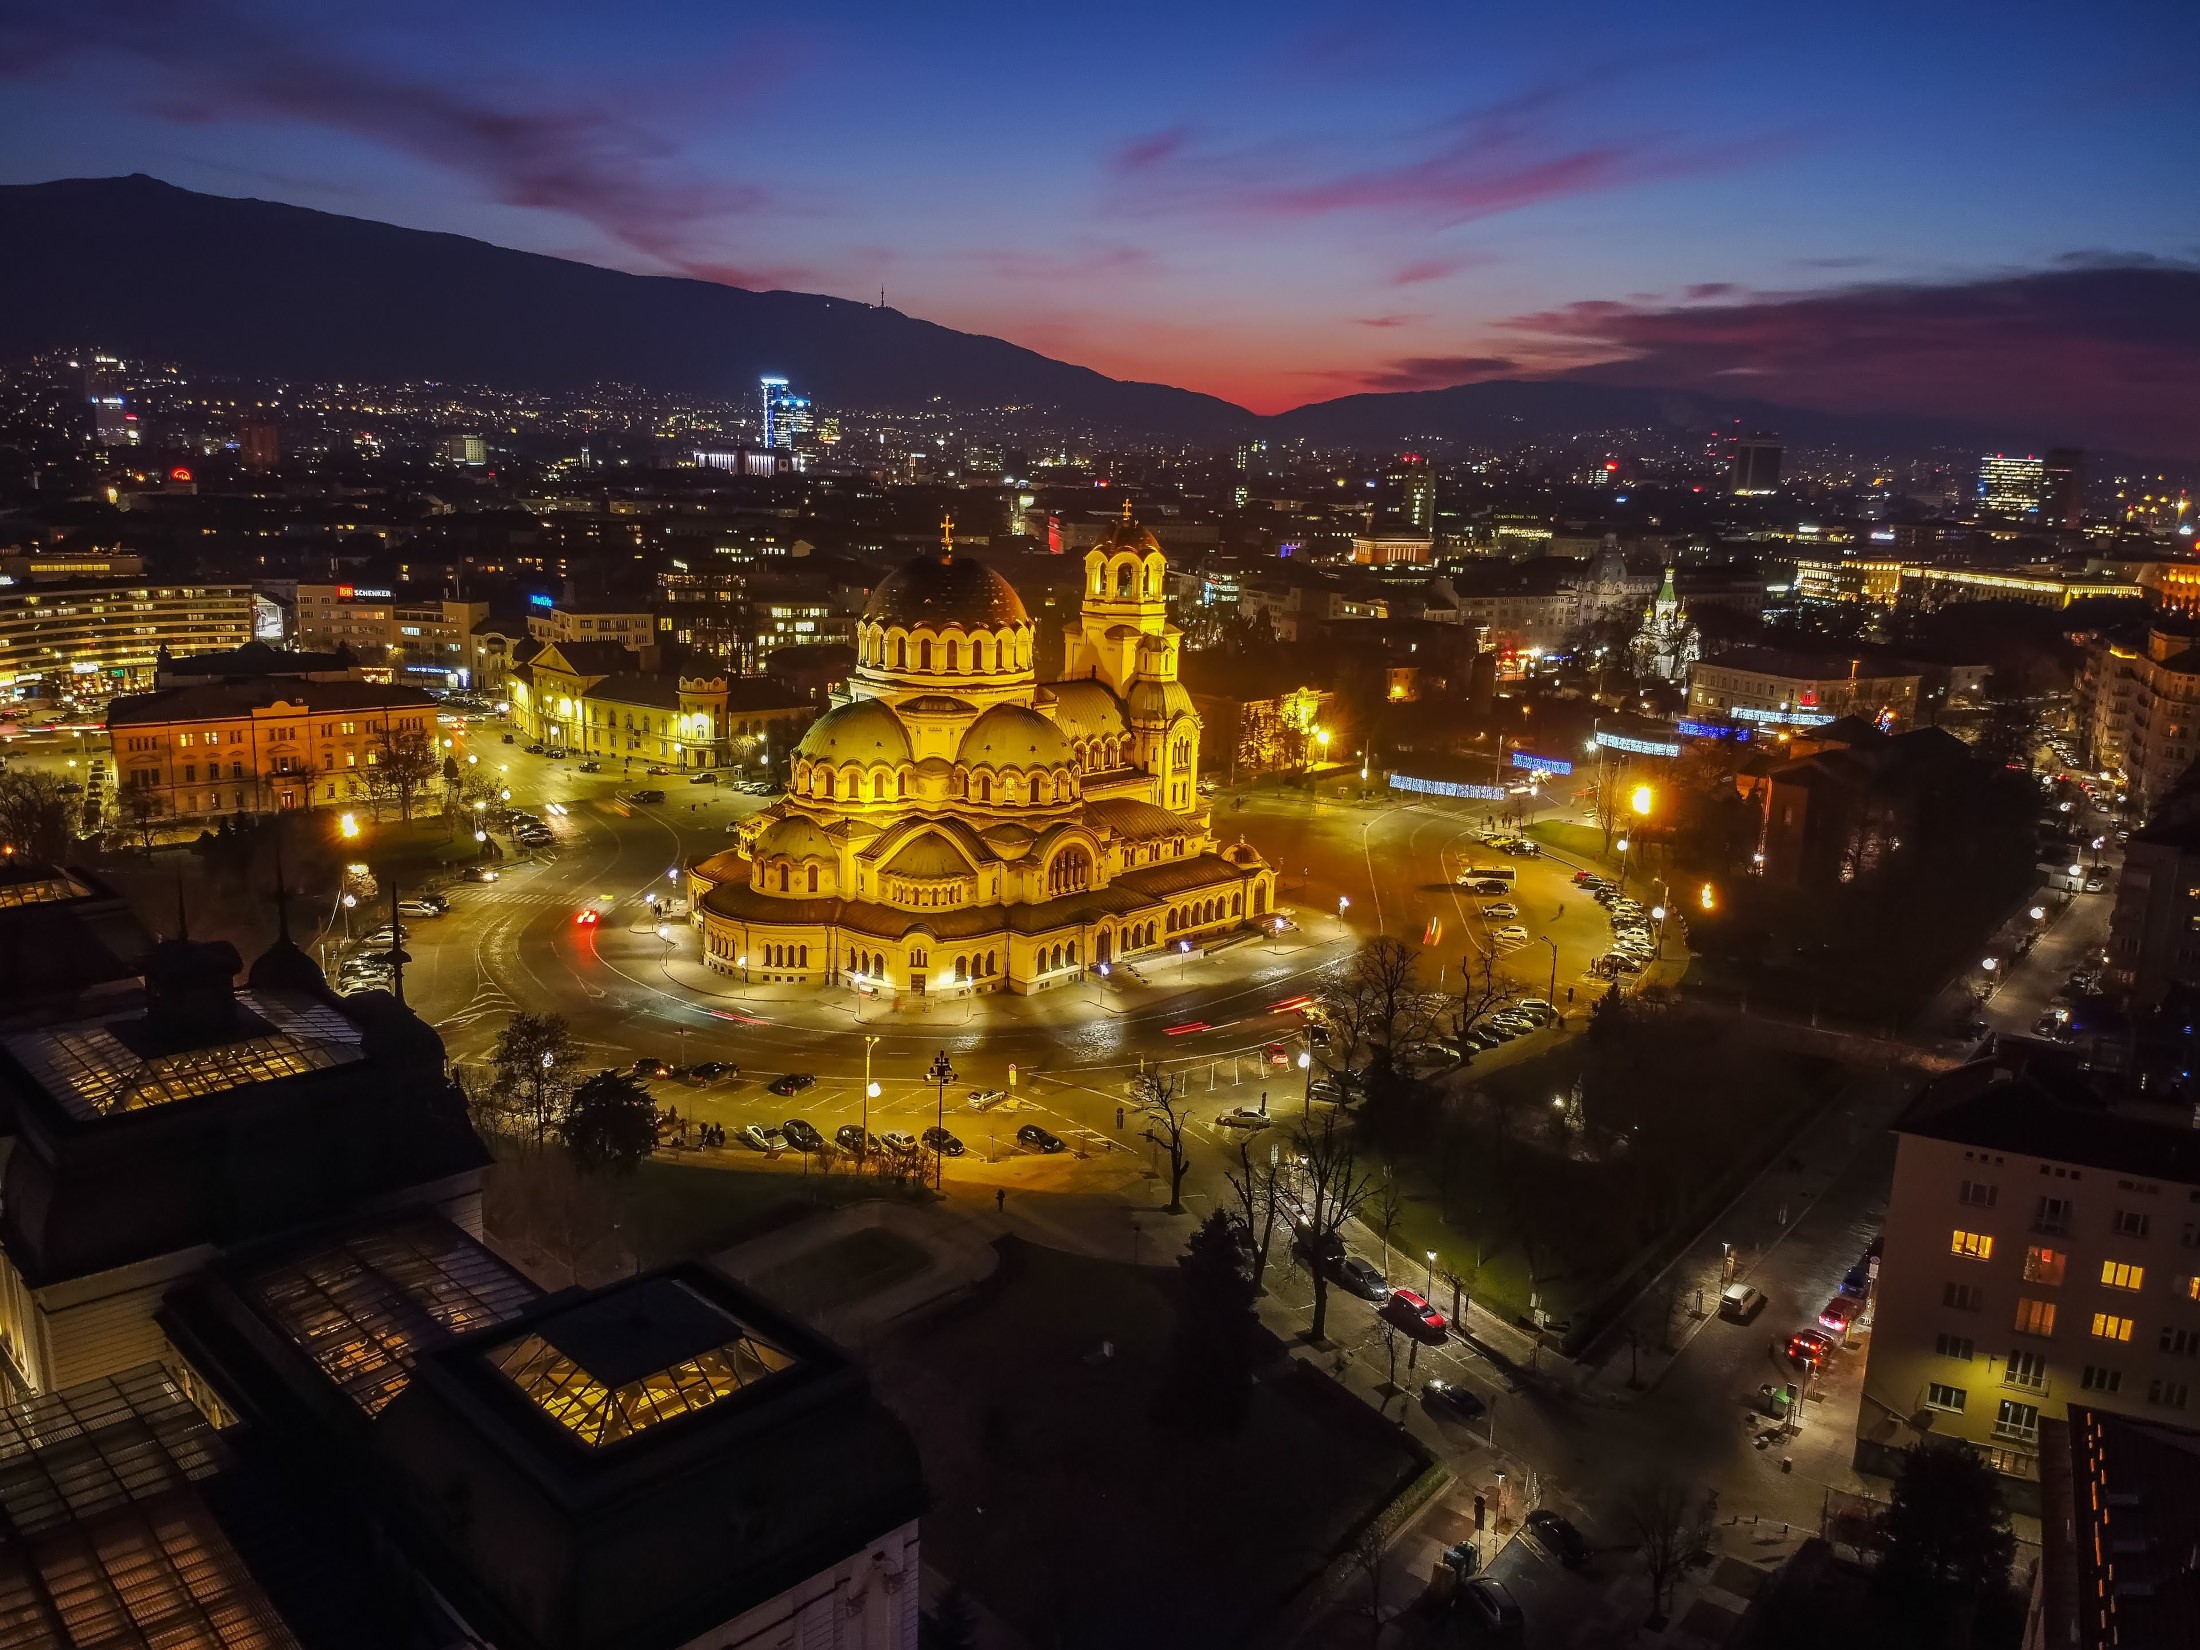 A night aerial view of Sofia, Bulgaria with Saint Alexander Nevsky cathedral church